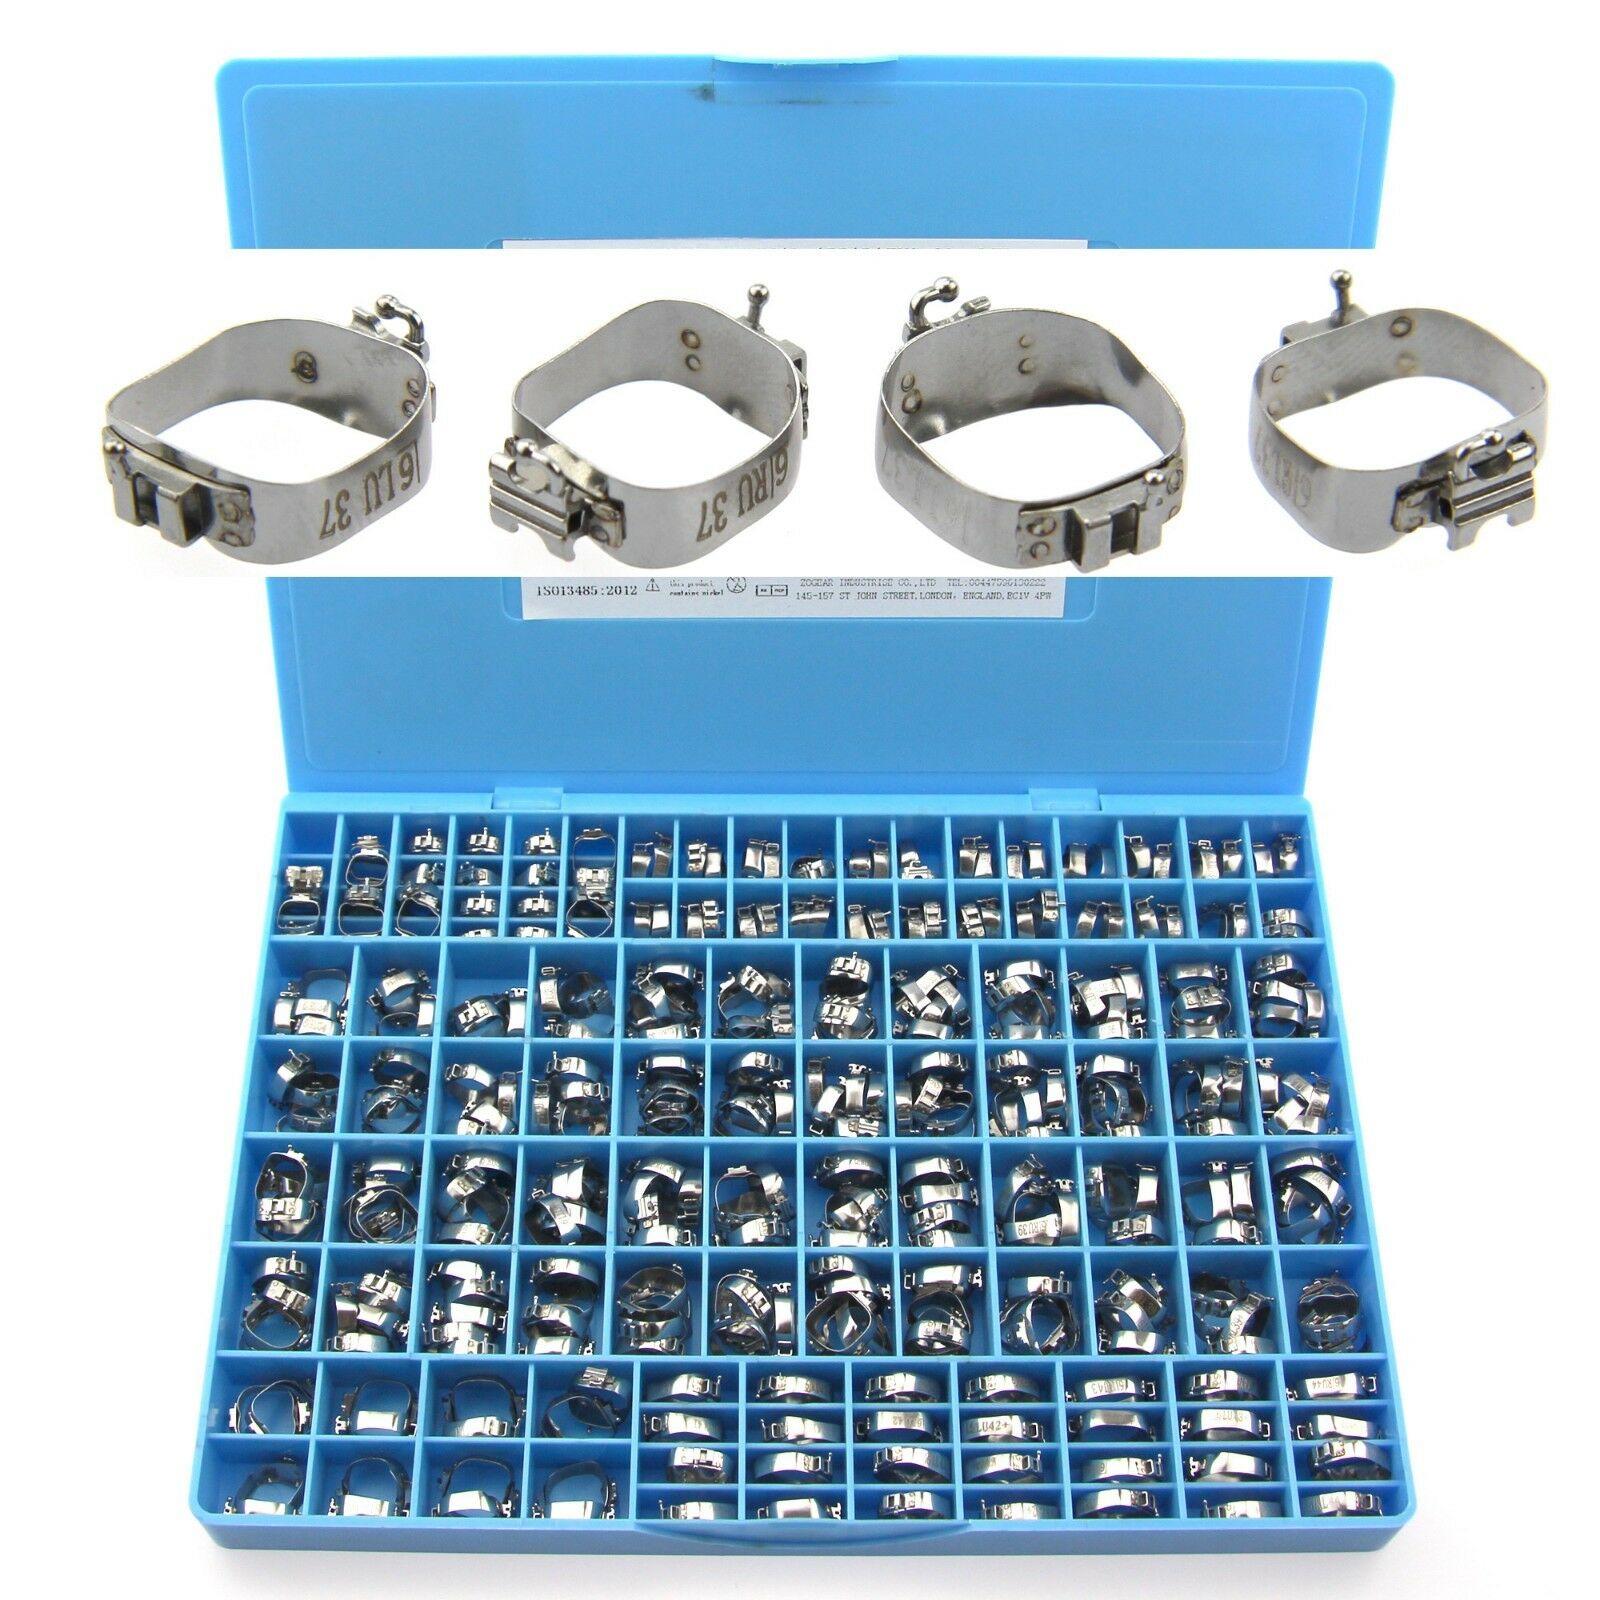 Generic Dental Orthodontic Molar Buccal Tube Band Stainless Steel Metal Brackets  Braces 0.022 With Hook On 3